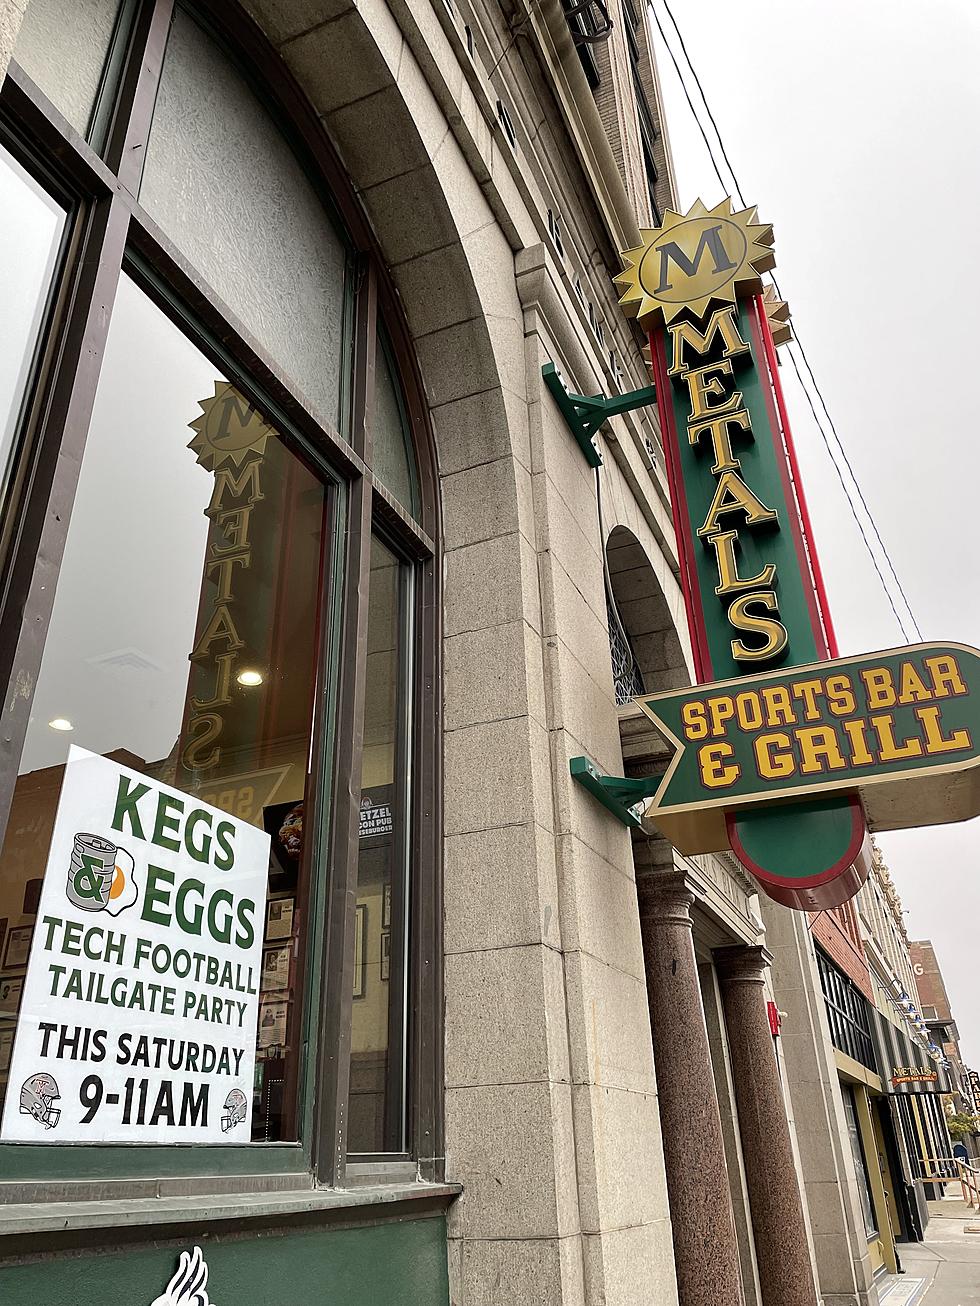 Football Is Almost Here, And That Means Kegs &#038; Eggs